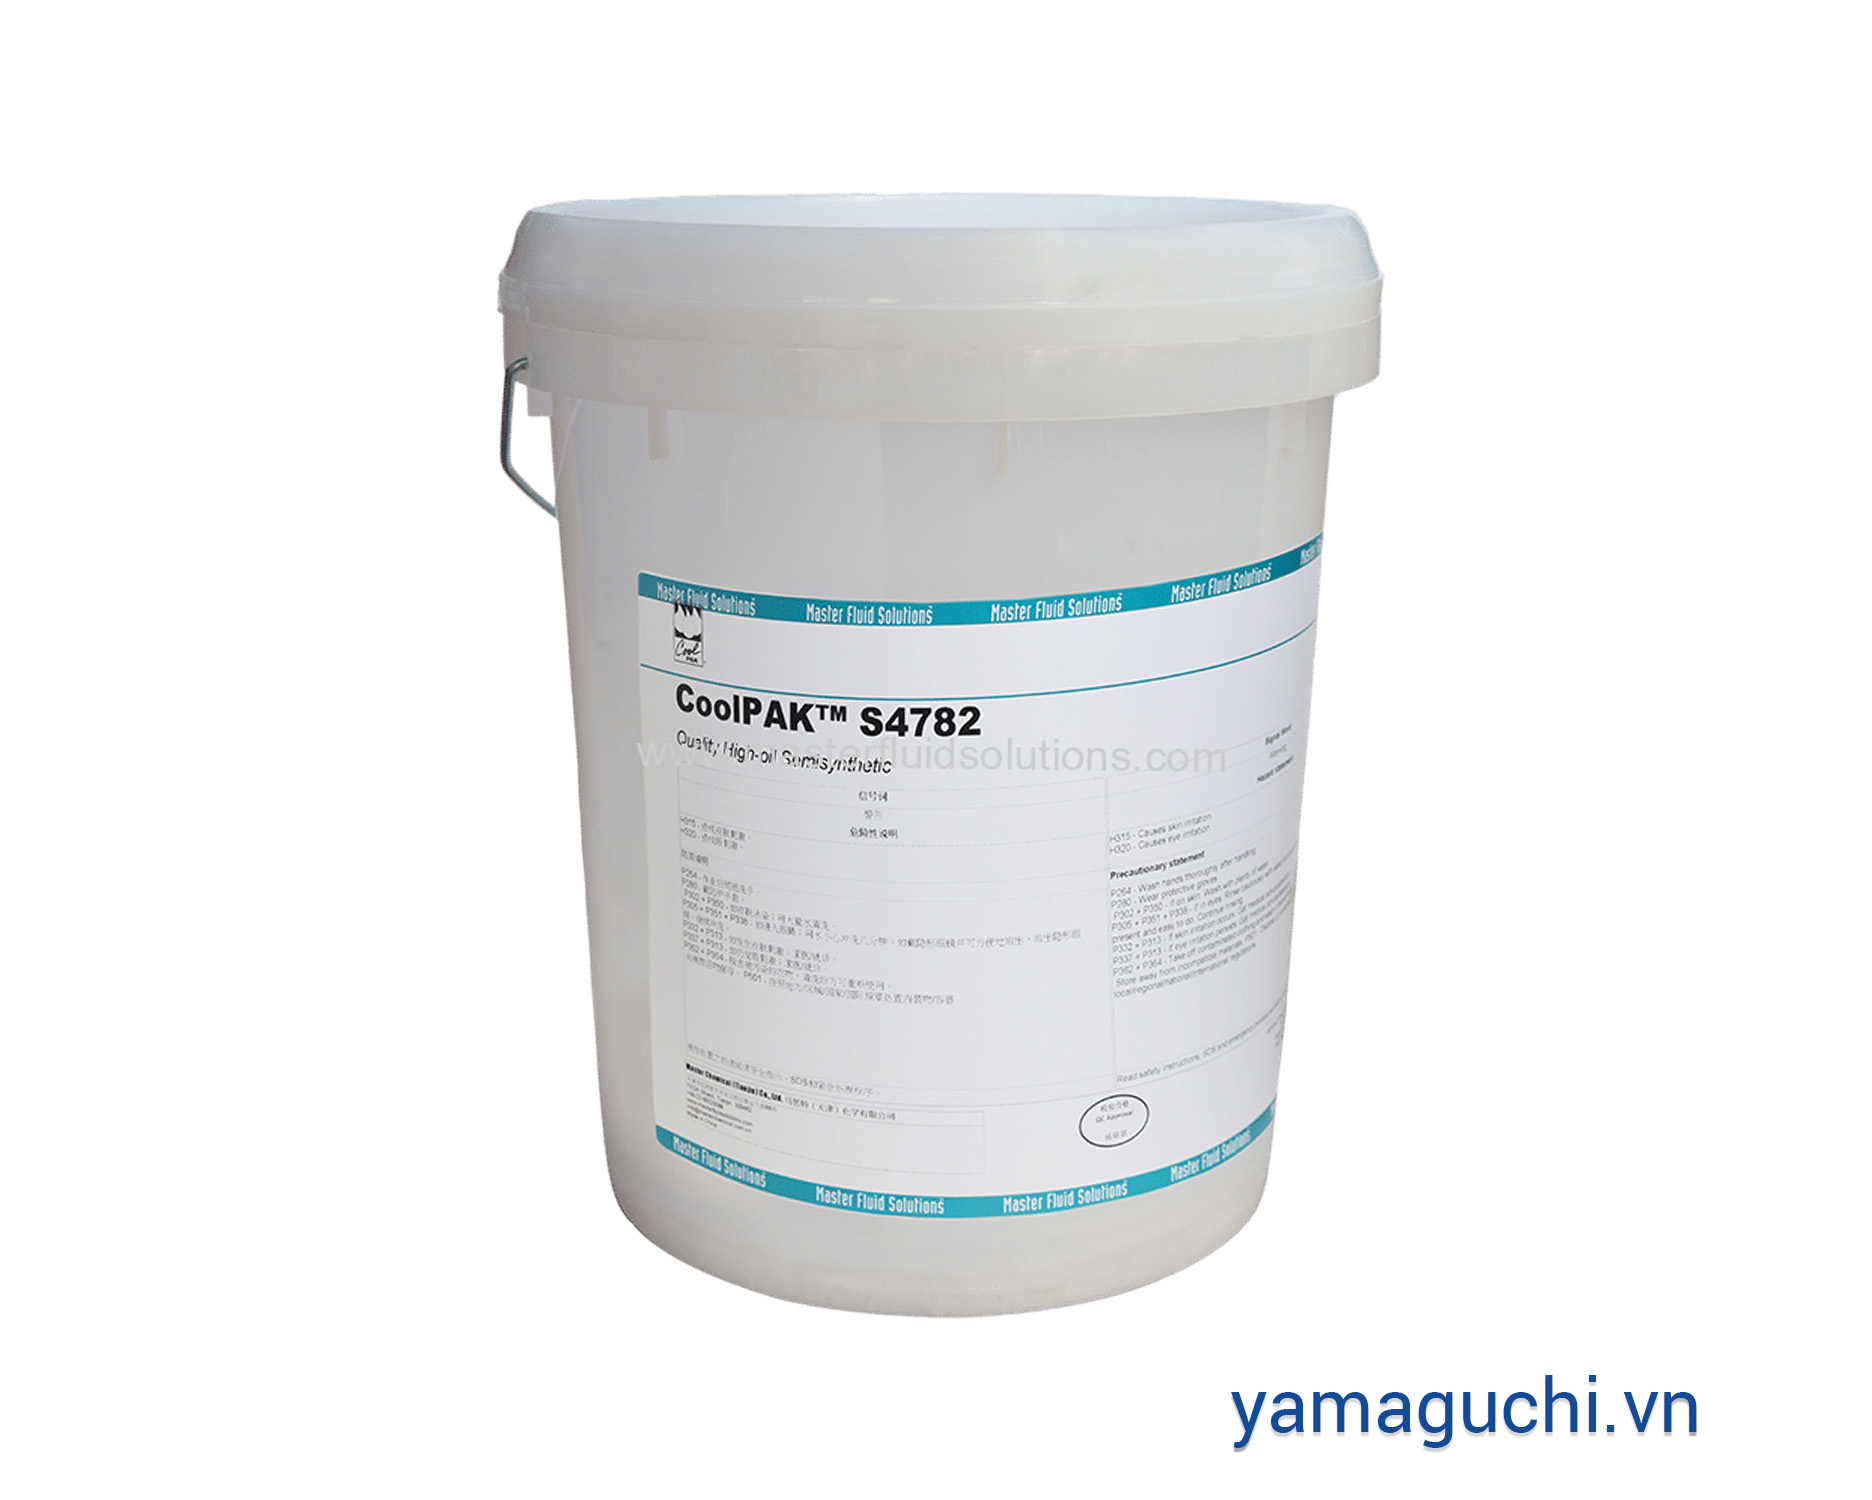 CoolPAK S4782 water soluble coolant